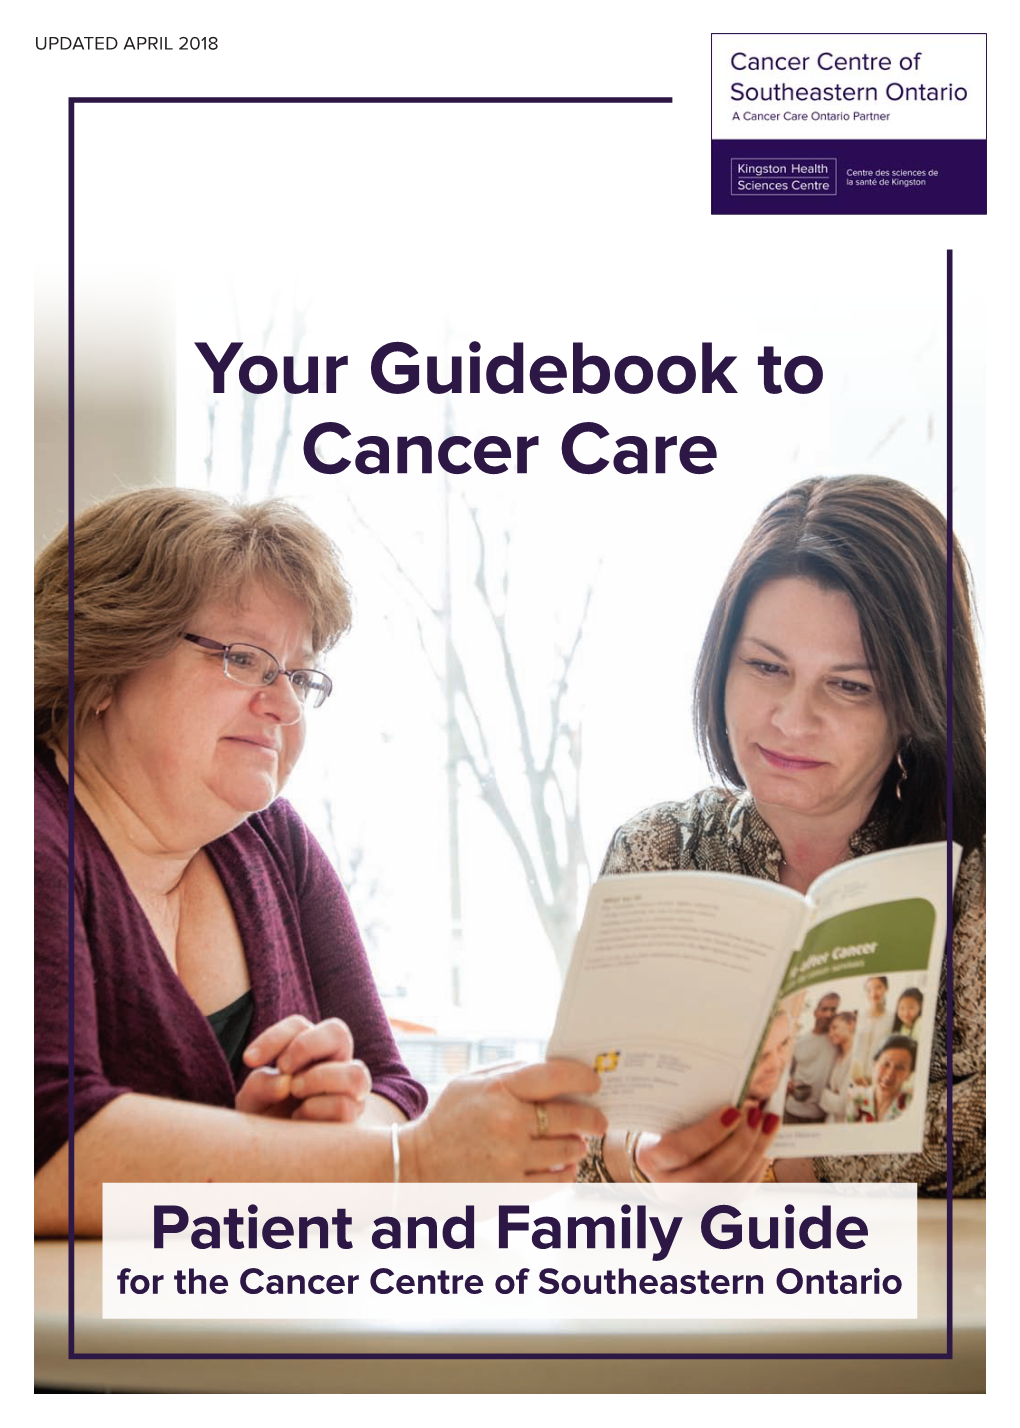 Your Guidebook to Cancer Care